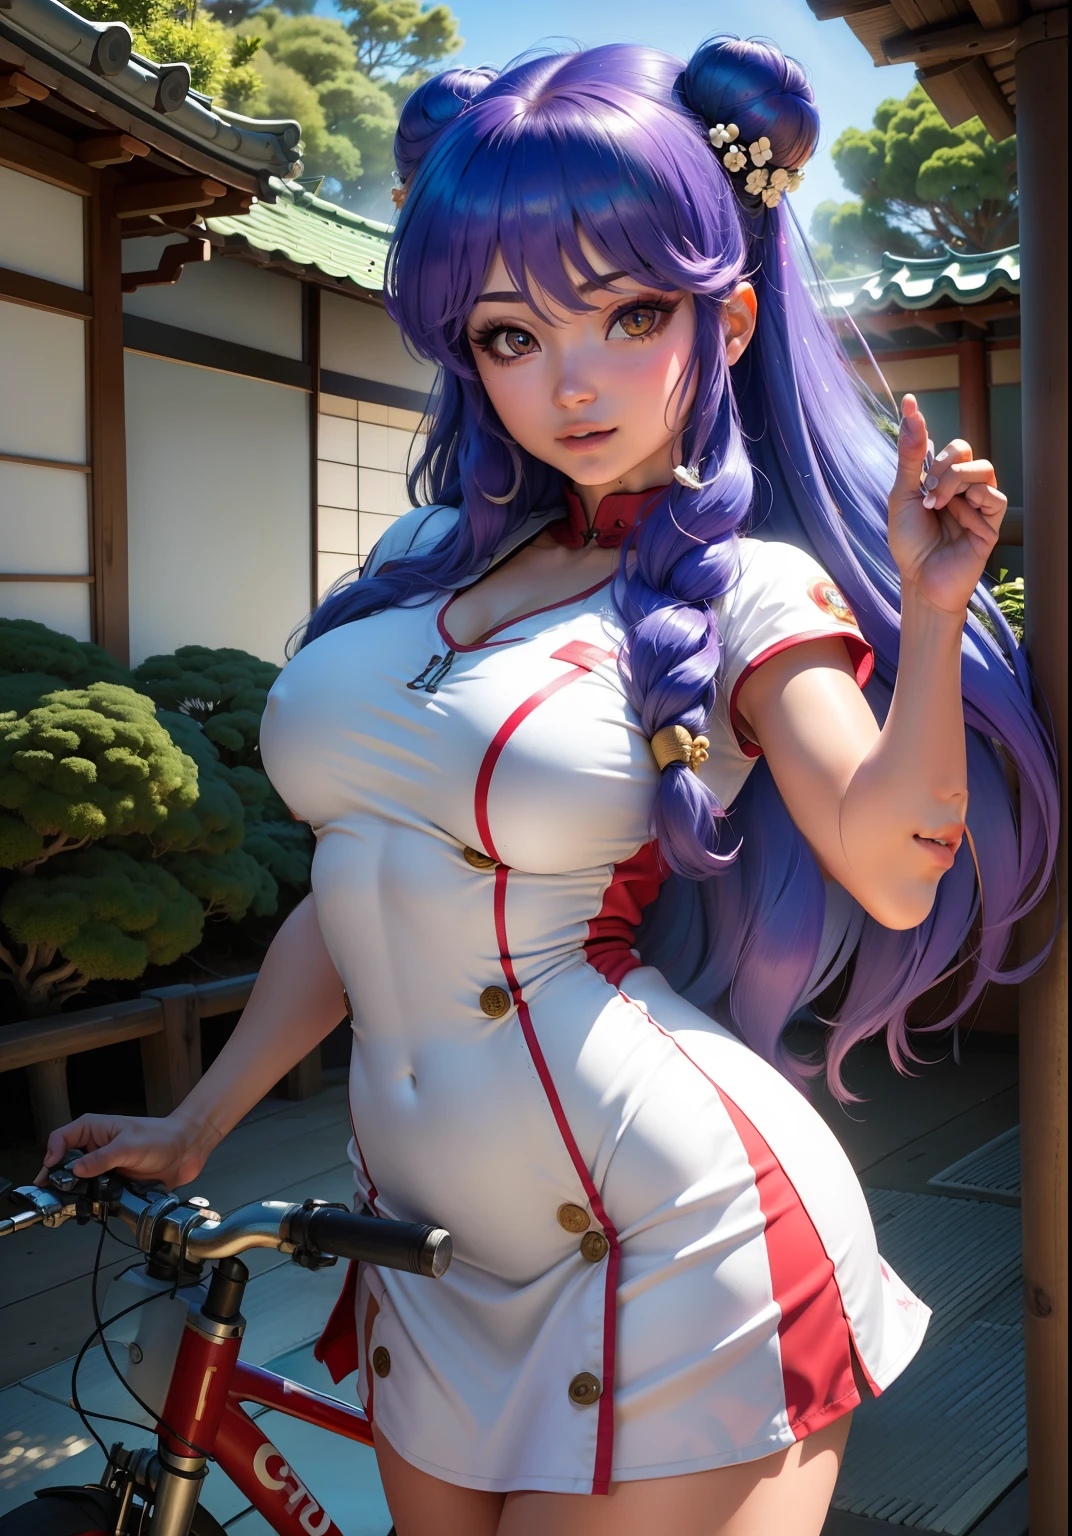 (shampoowaifu: 1), Beautiful, smile, pose casual, lilac hair,  provocative,challenging eyes, bright Eyes, chinese long suit, Red dress, riding bicycle, delivering food at home 

(realist: 1.2), (realism), (masterpiece: 1.2), (Best Quality), (ultra detailed), (8k, 4k, Intricate), (full body shot: 1), (85 mm), light particles, (Very detailed: 1.2), (detailed face: 1.2), (degraded), colorful and detailed lilac eyes

(Japanese Garden House)(detailed background), (Angle Dynamic: 1.2), (dynamic  pose: 1.2),